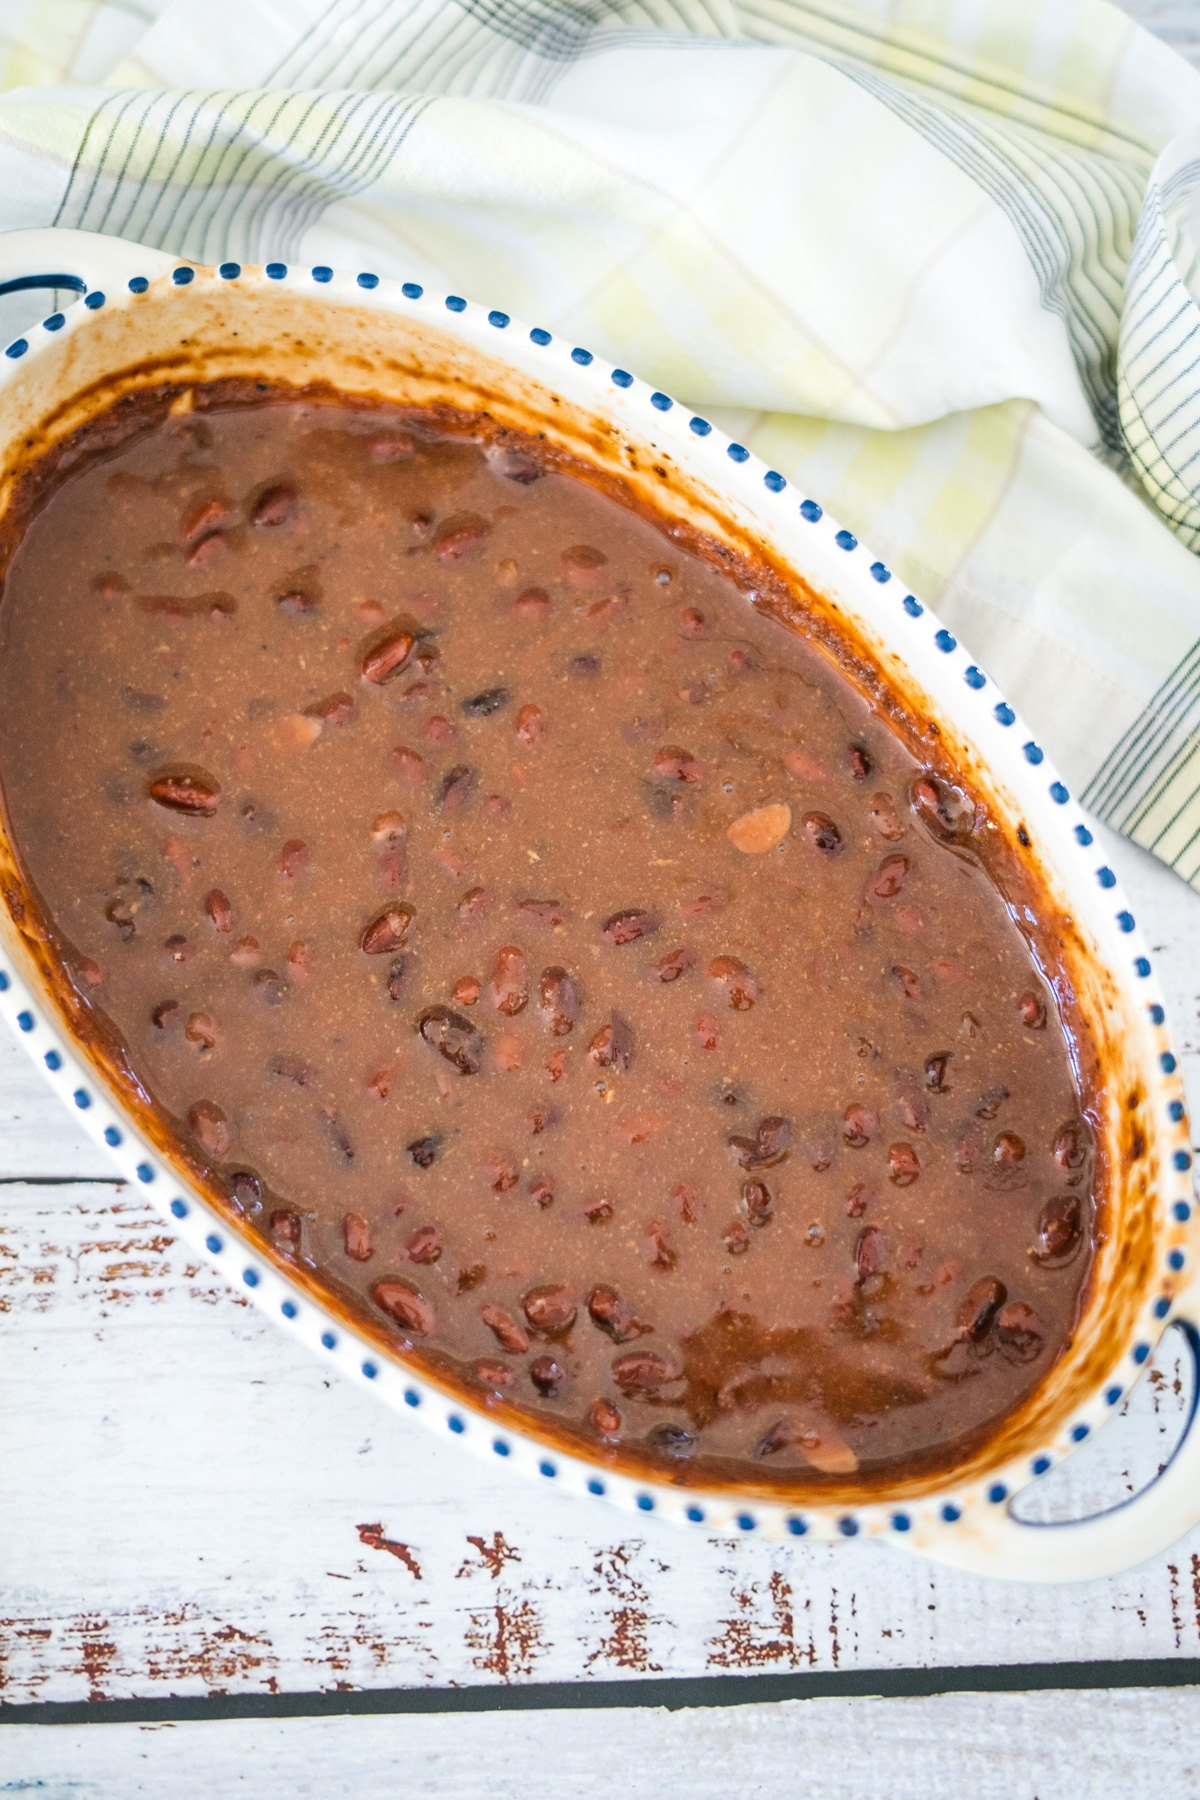 A casserole dish with beans and sauce on a wooden table.